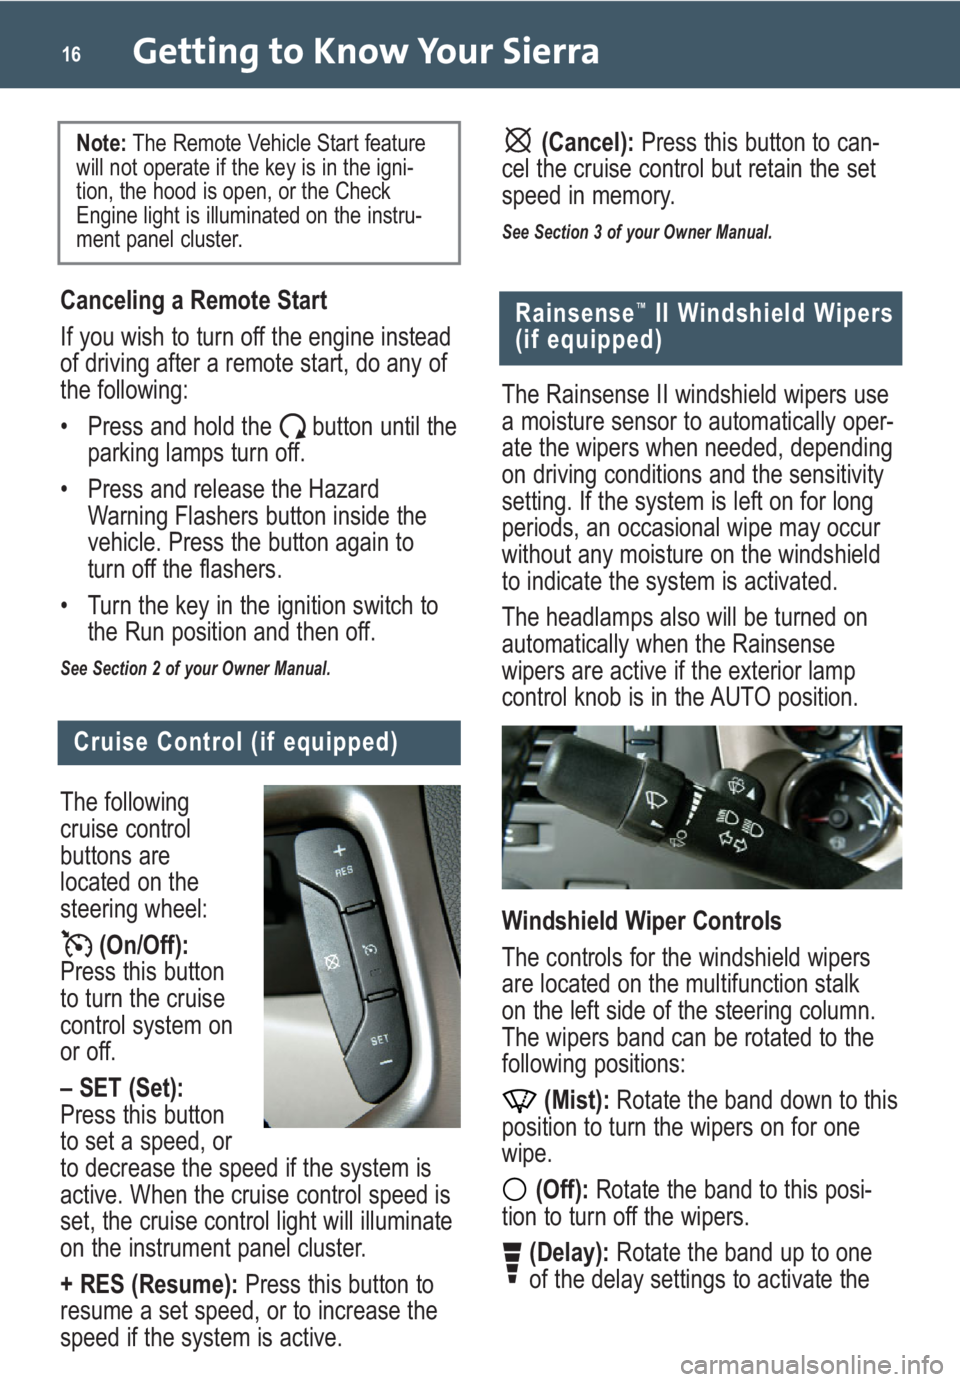 GMC SIERRA 2009  Get To Know Guide Getting to Know Your Sierra16
Cruise Control (if equipped)
The following
cruise control
buttons are
located on the
steering wheel:
(On/Off):
Press this button
to turn the cruise
control system on
or o